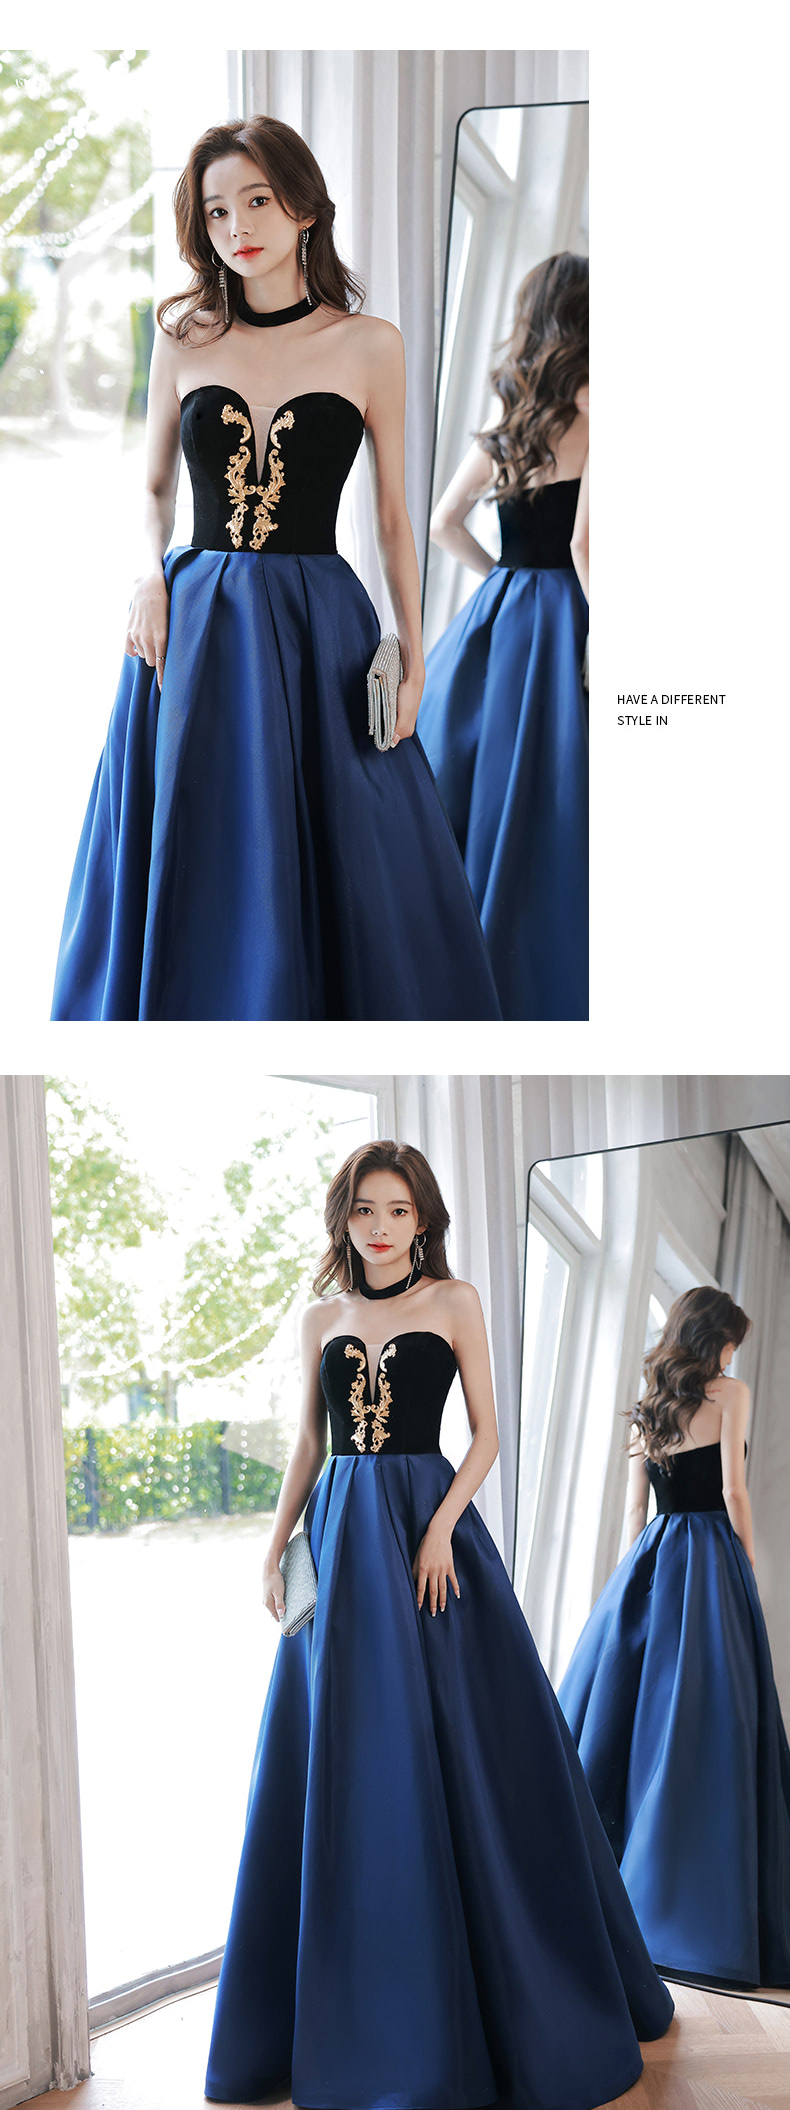 Fashion-Cocktail-Night-Dress-Blue-Evening-Dance-Party-Long-Gown10.jpg